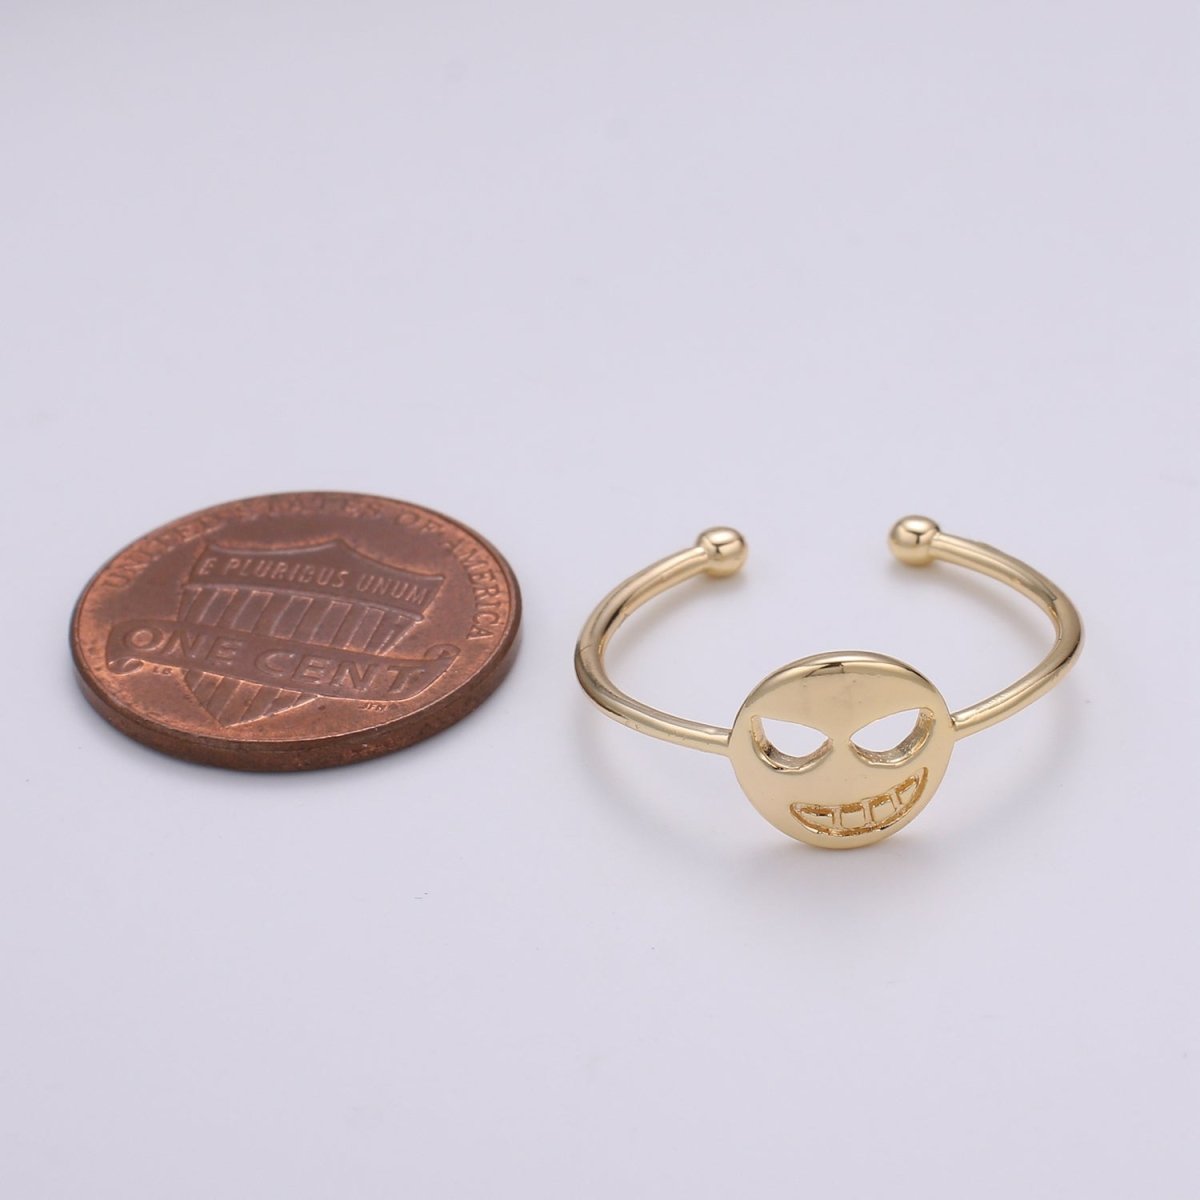 Mask 18k Gold Ring, Adjustable Gold Curb Ring, Simple Round Ring, Halloween Ring R-260 - DLUXCA